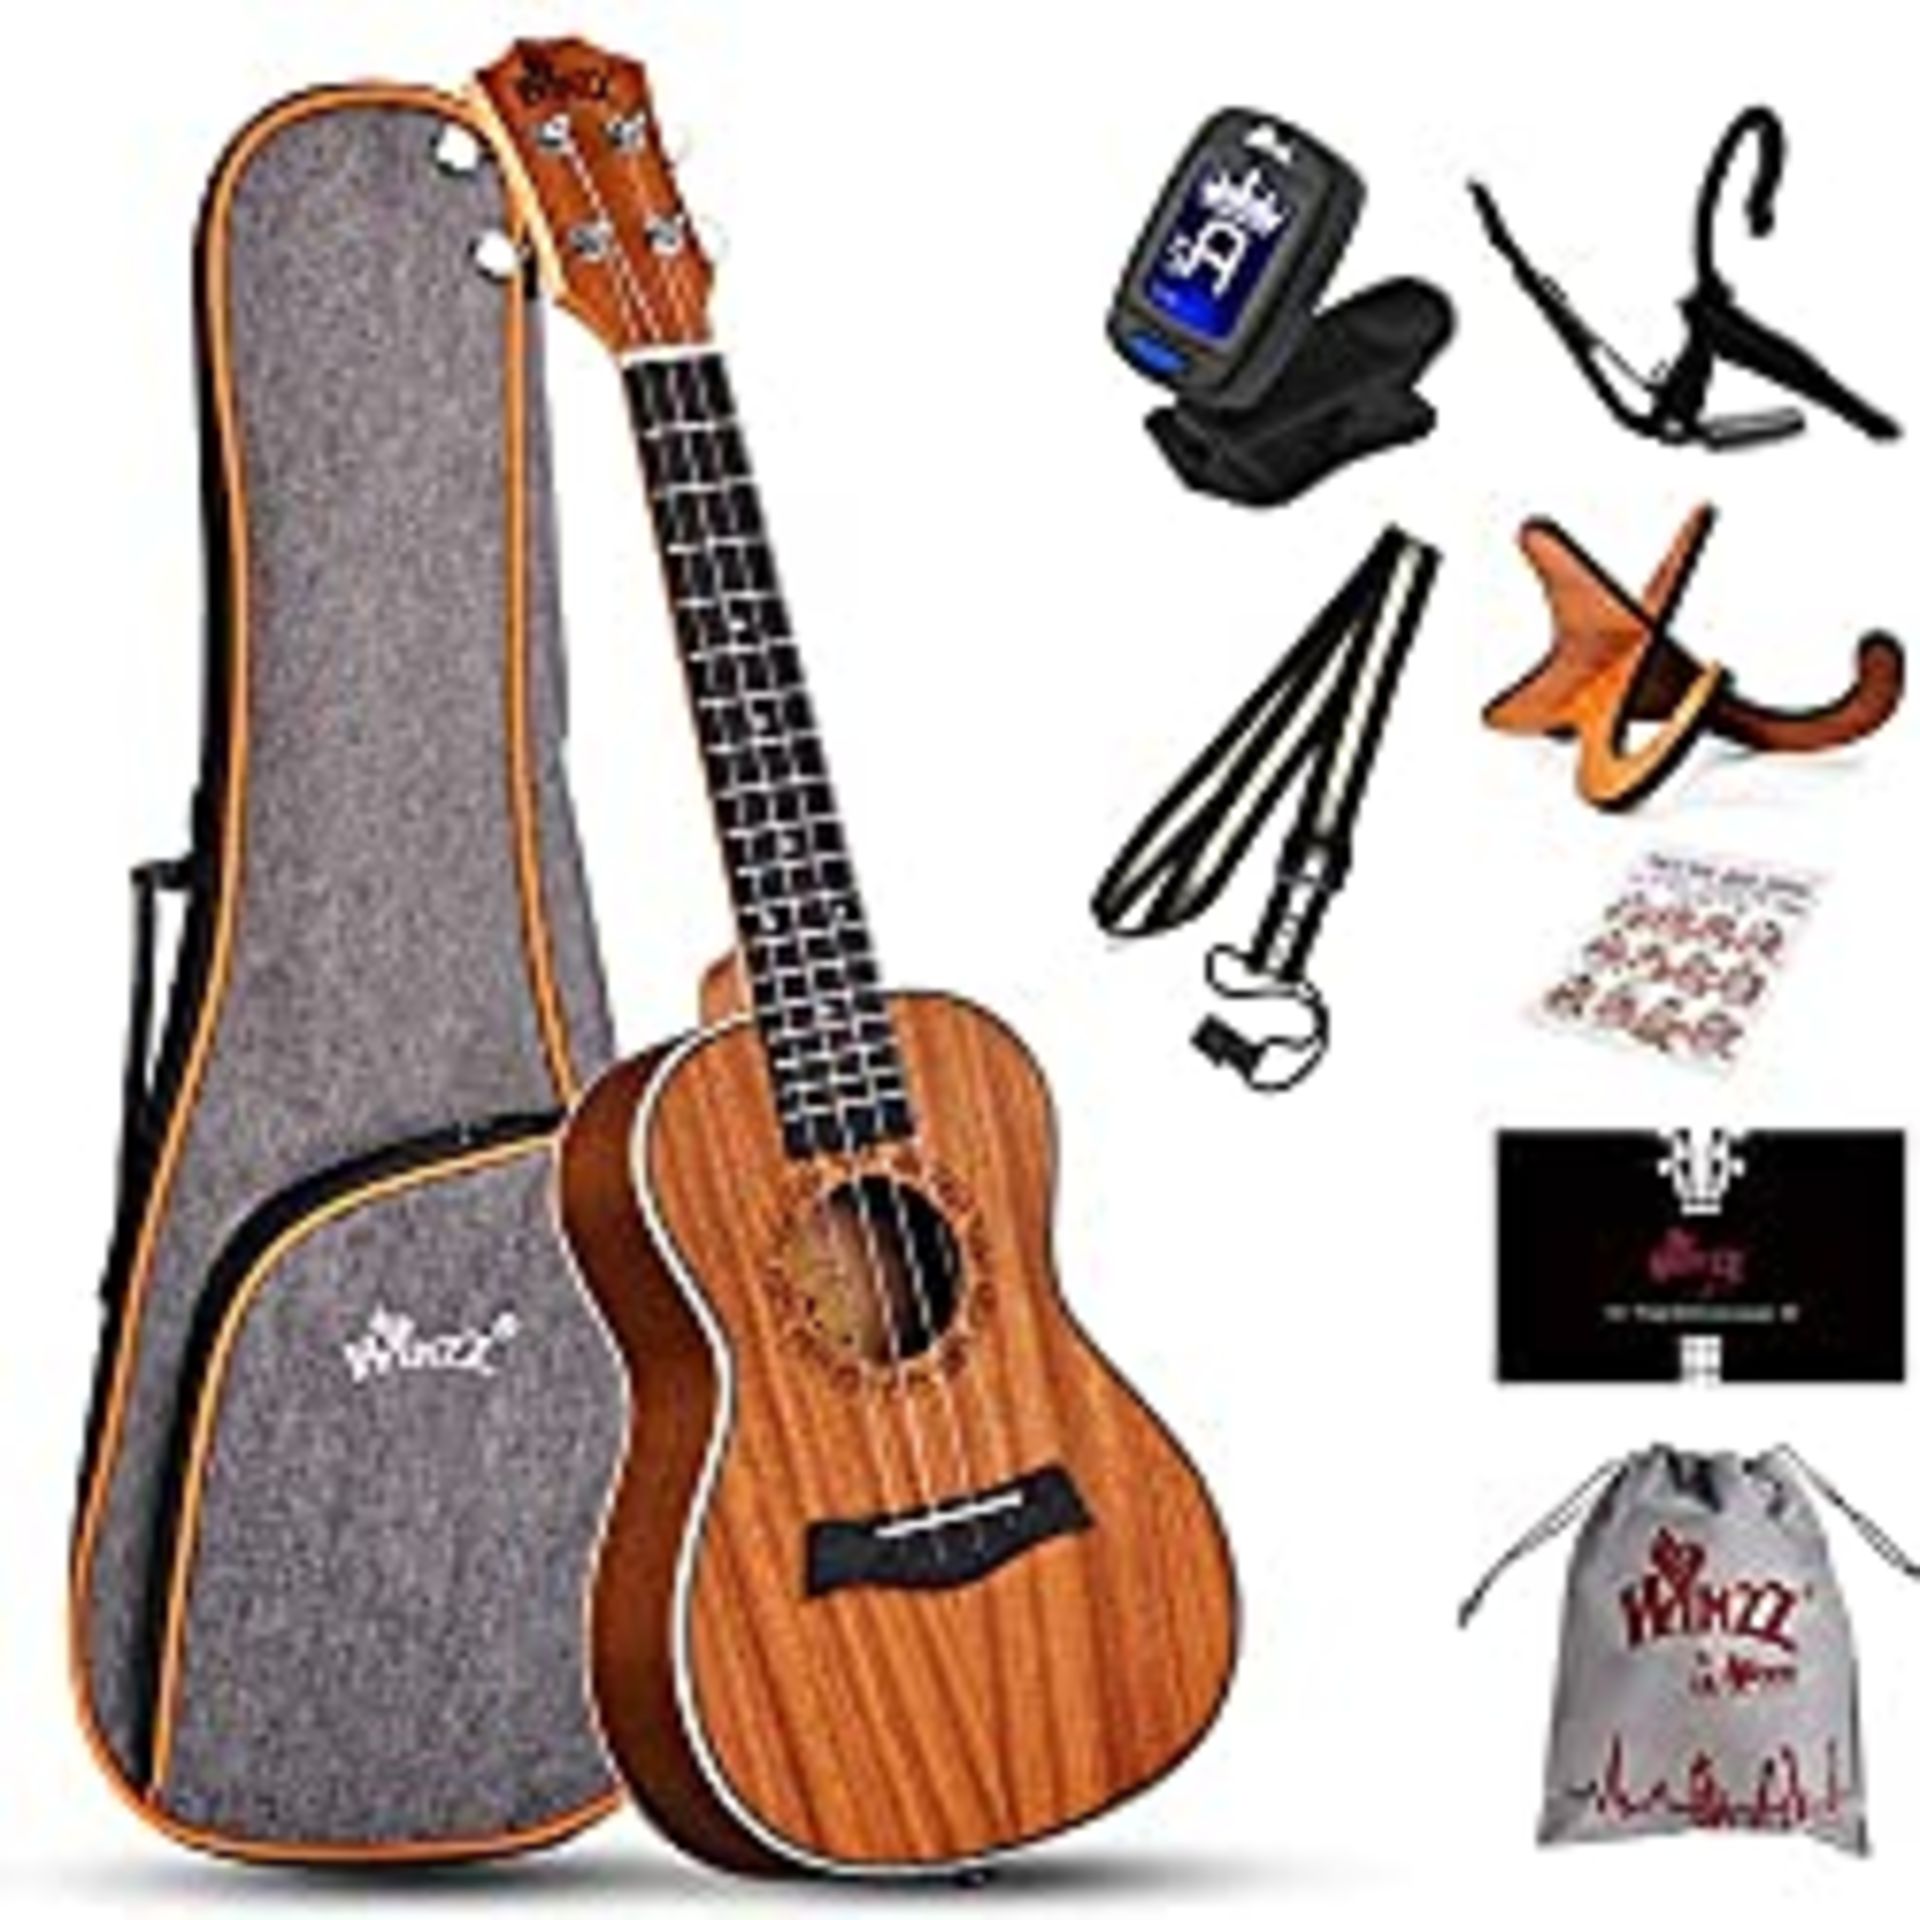 RRP £52.45 Winzz Concert Ukulele 23 Inch for Adults Beginners